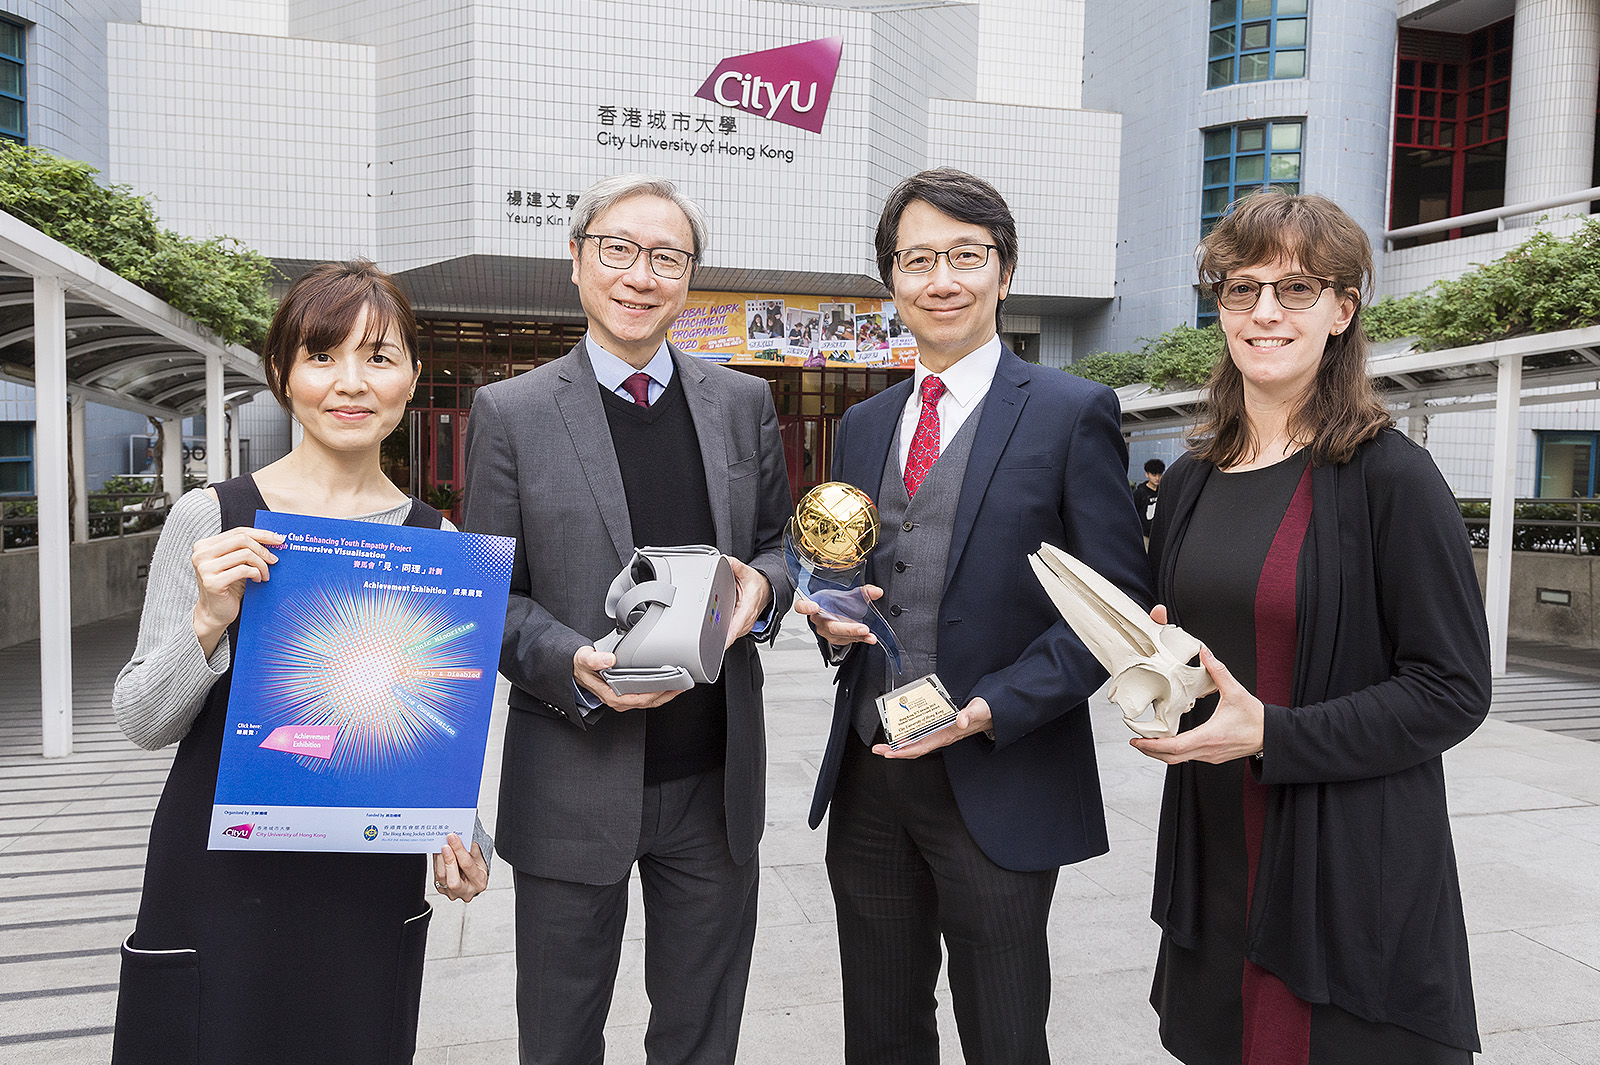 (From left) Dr Lam Miu-ling, Professor Horace Ip Ho-shing, Professor Matthew Lee Kwok-on, and Professor Sophie St-Hilaire.